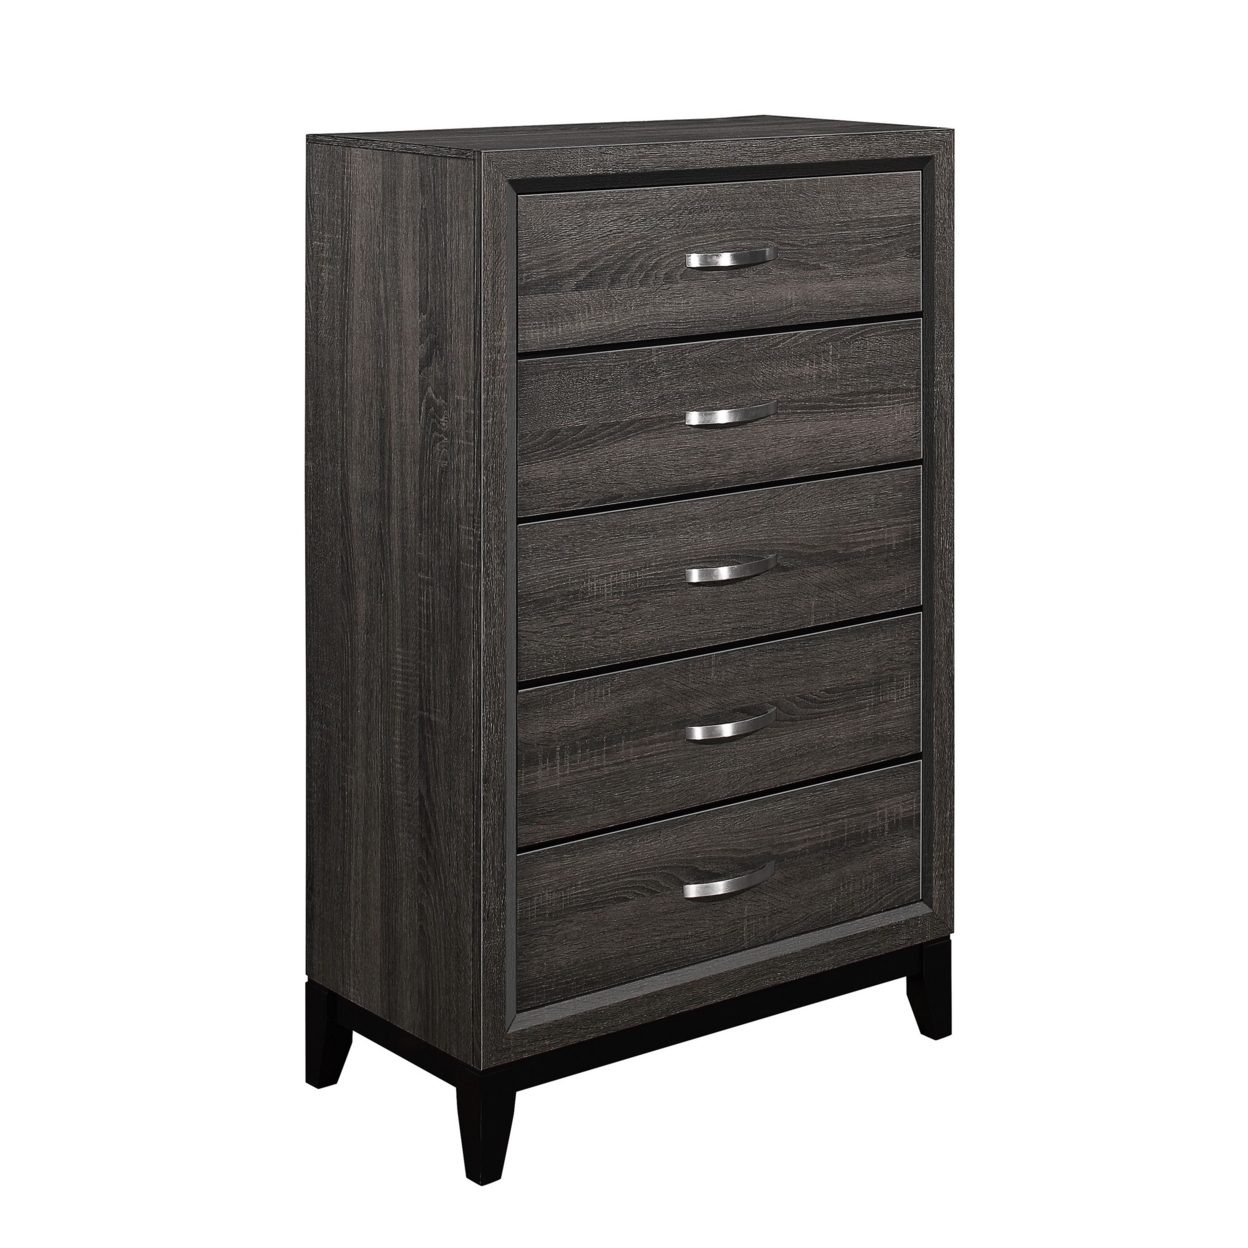 5 Drawer Wooden Chest With Grain Details And Chamfered Feet, Gray- Saltoro Sherpi